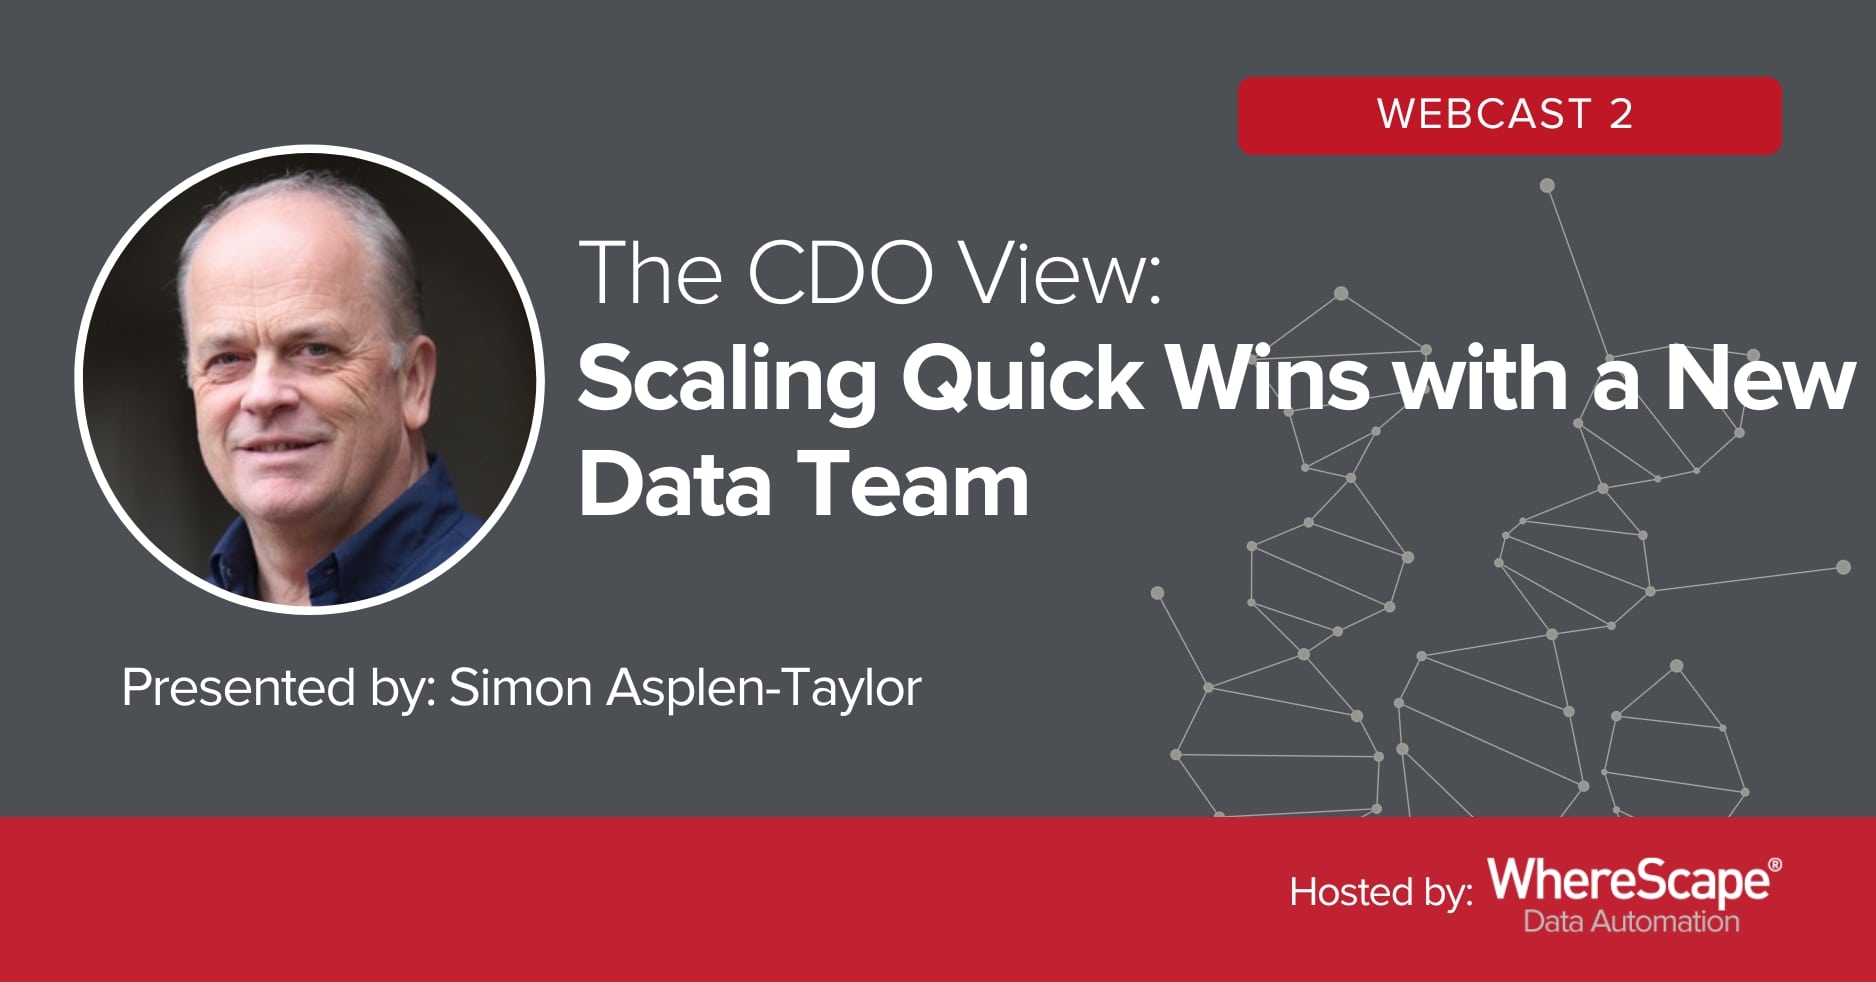 The CDO View: Scaling Quick Wins with a New Data Team